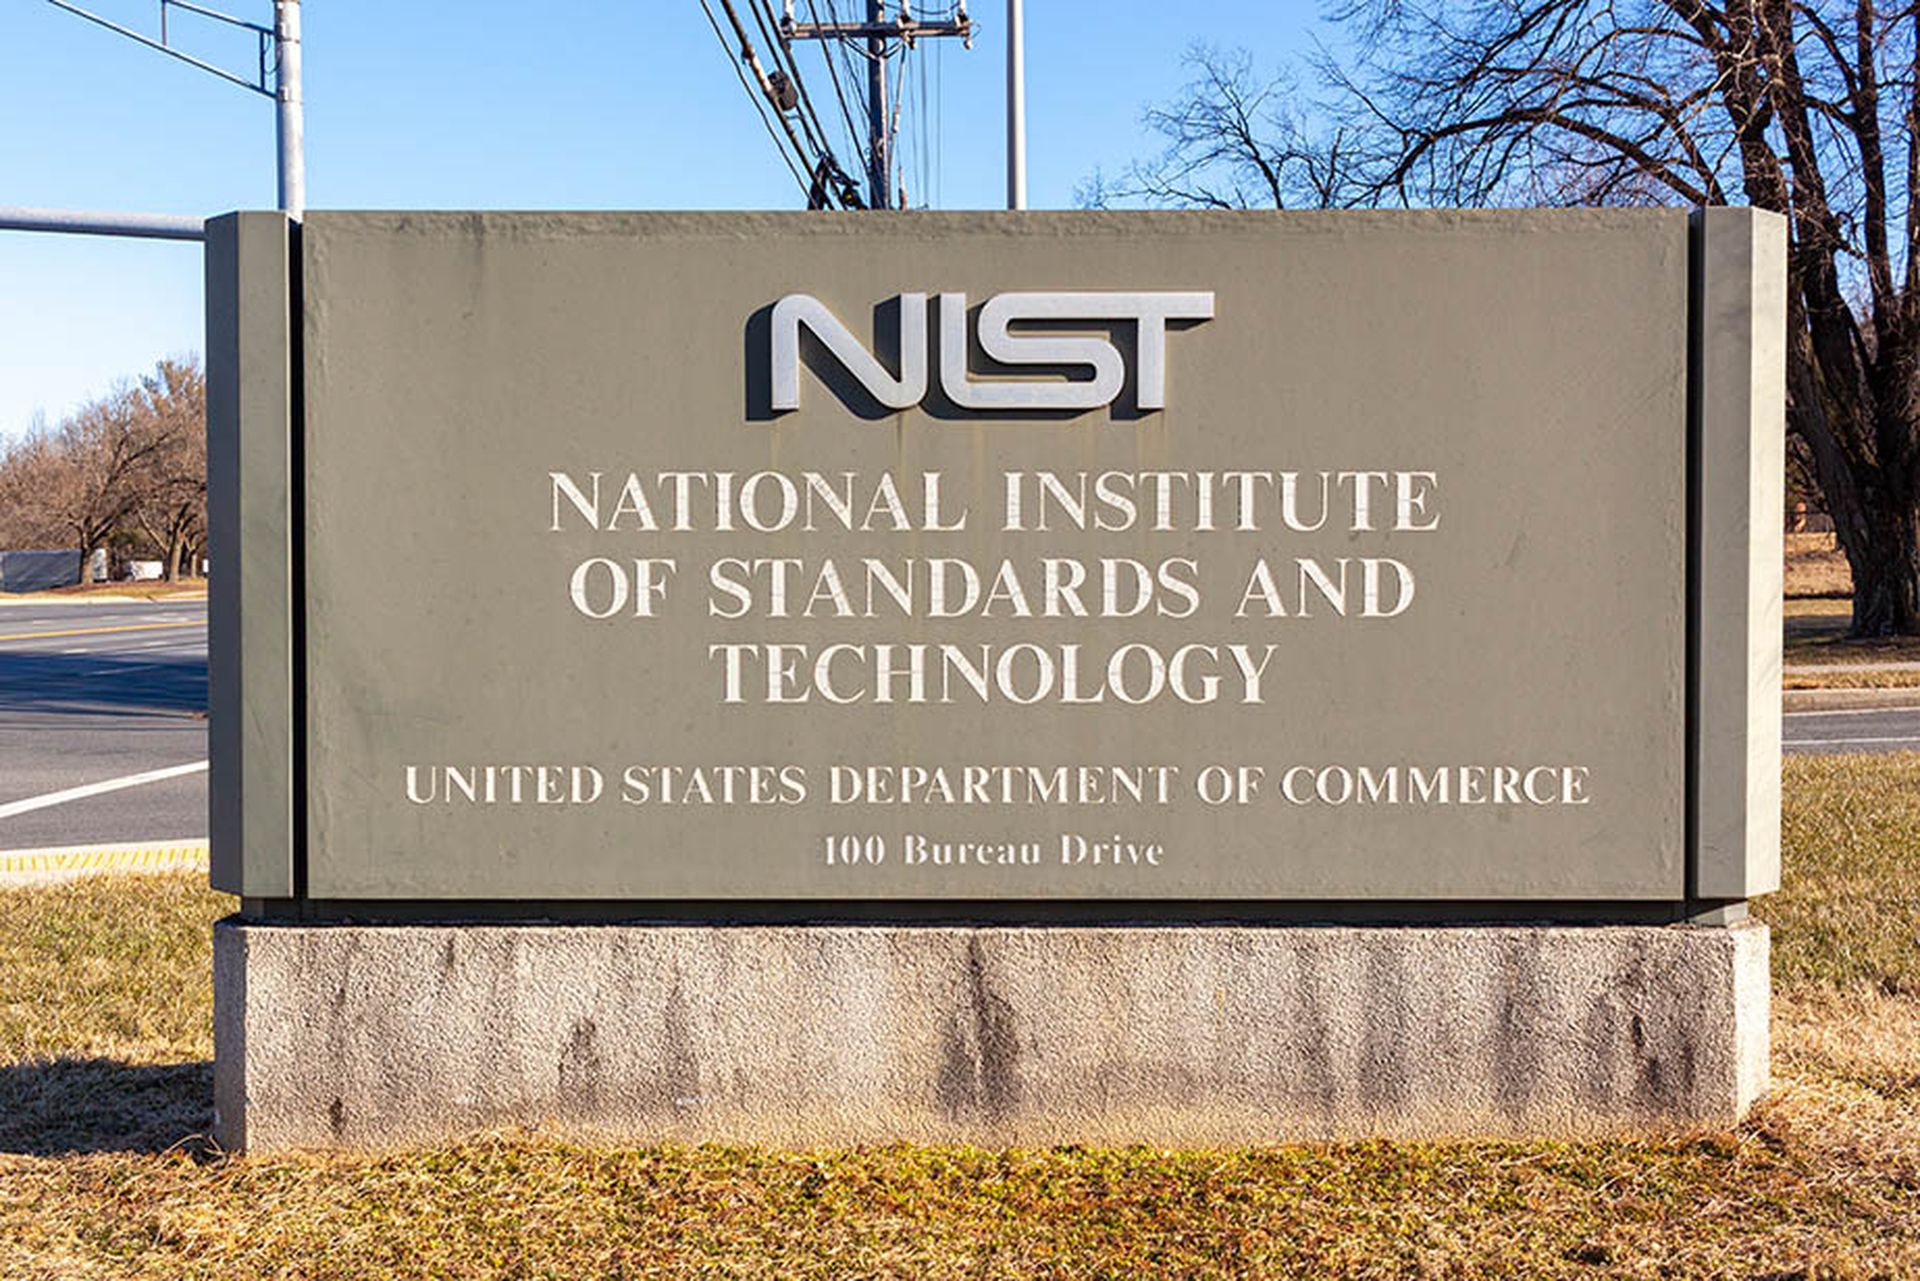 A sign for the National Institute of Standards and Technology is seen in the sunlight at an intersection.